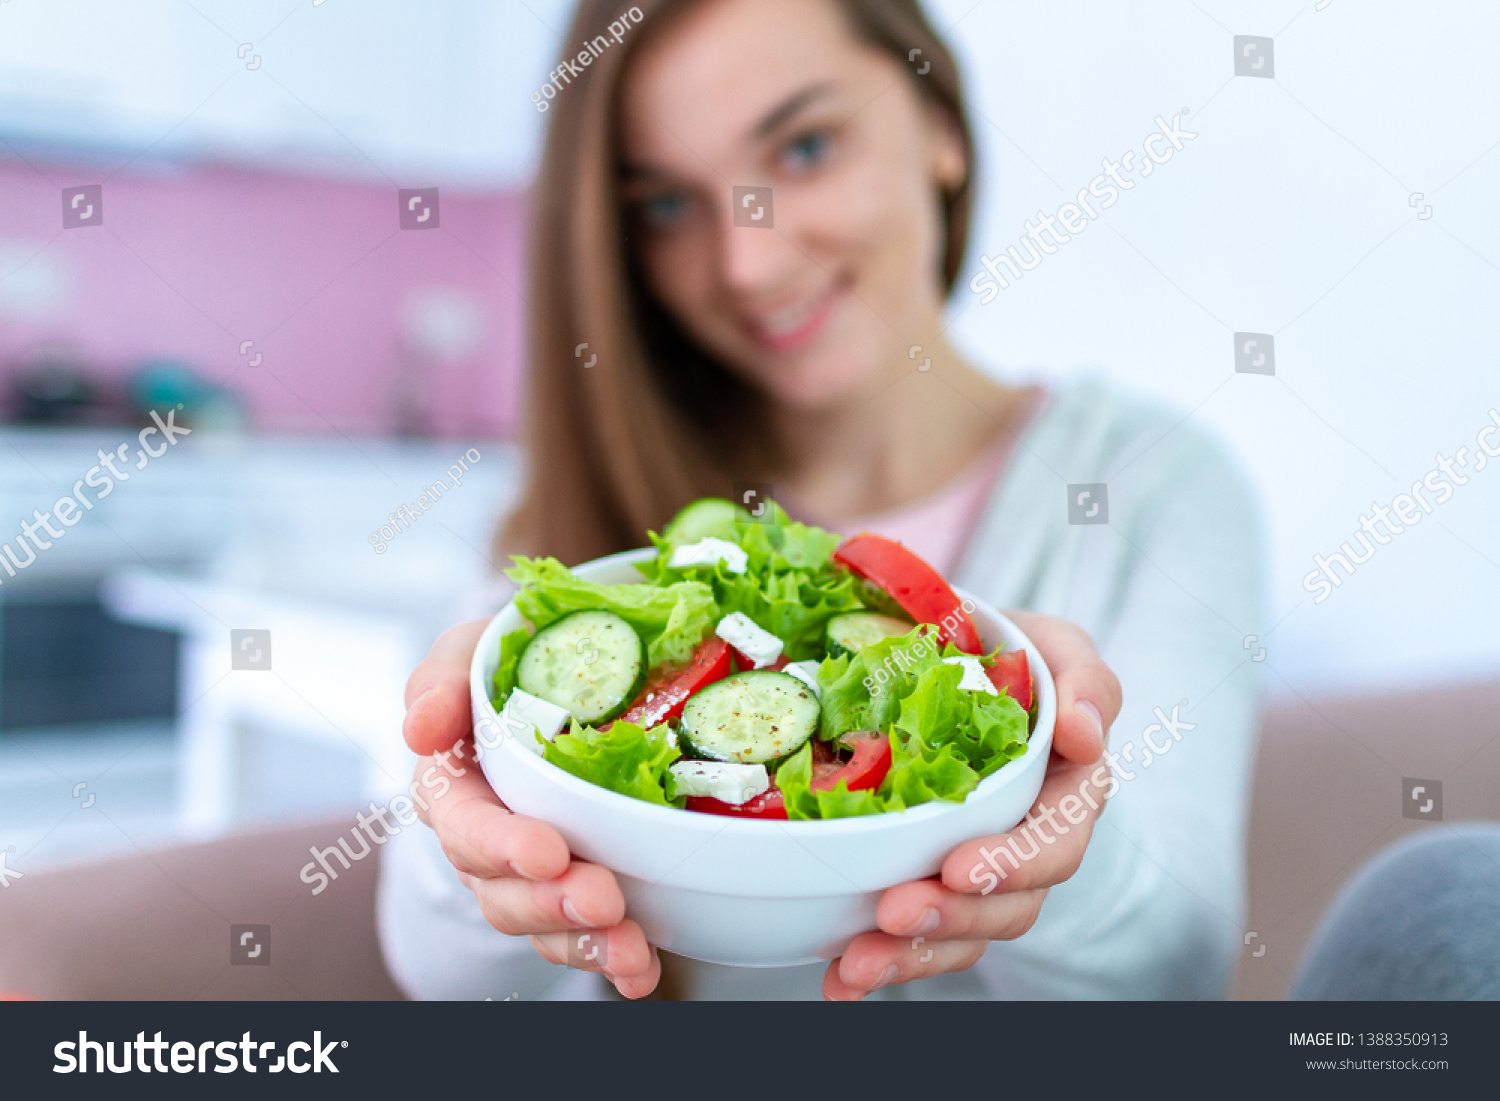 Healthy vegan woman holding a bowl of fresh vegetable salad. Balanced organic diet and clean eating. Healthy lifestyle #1388350913